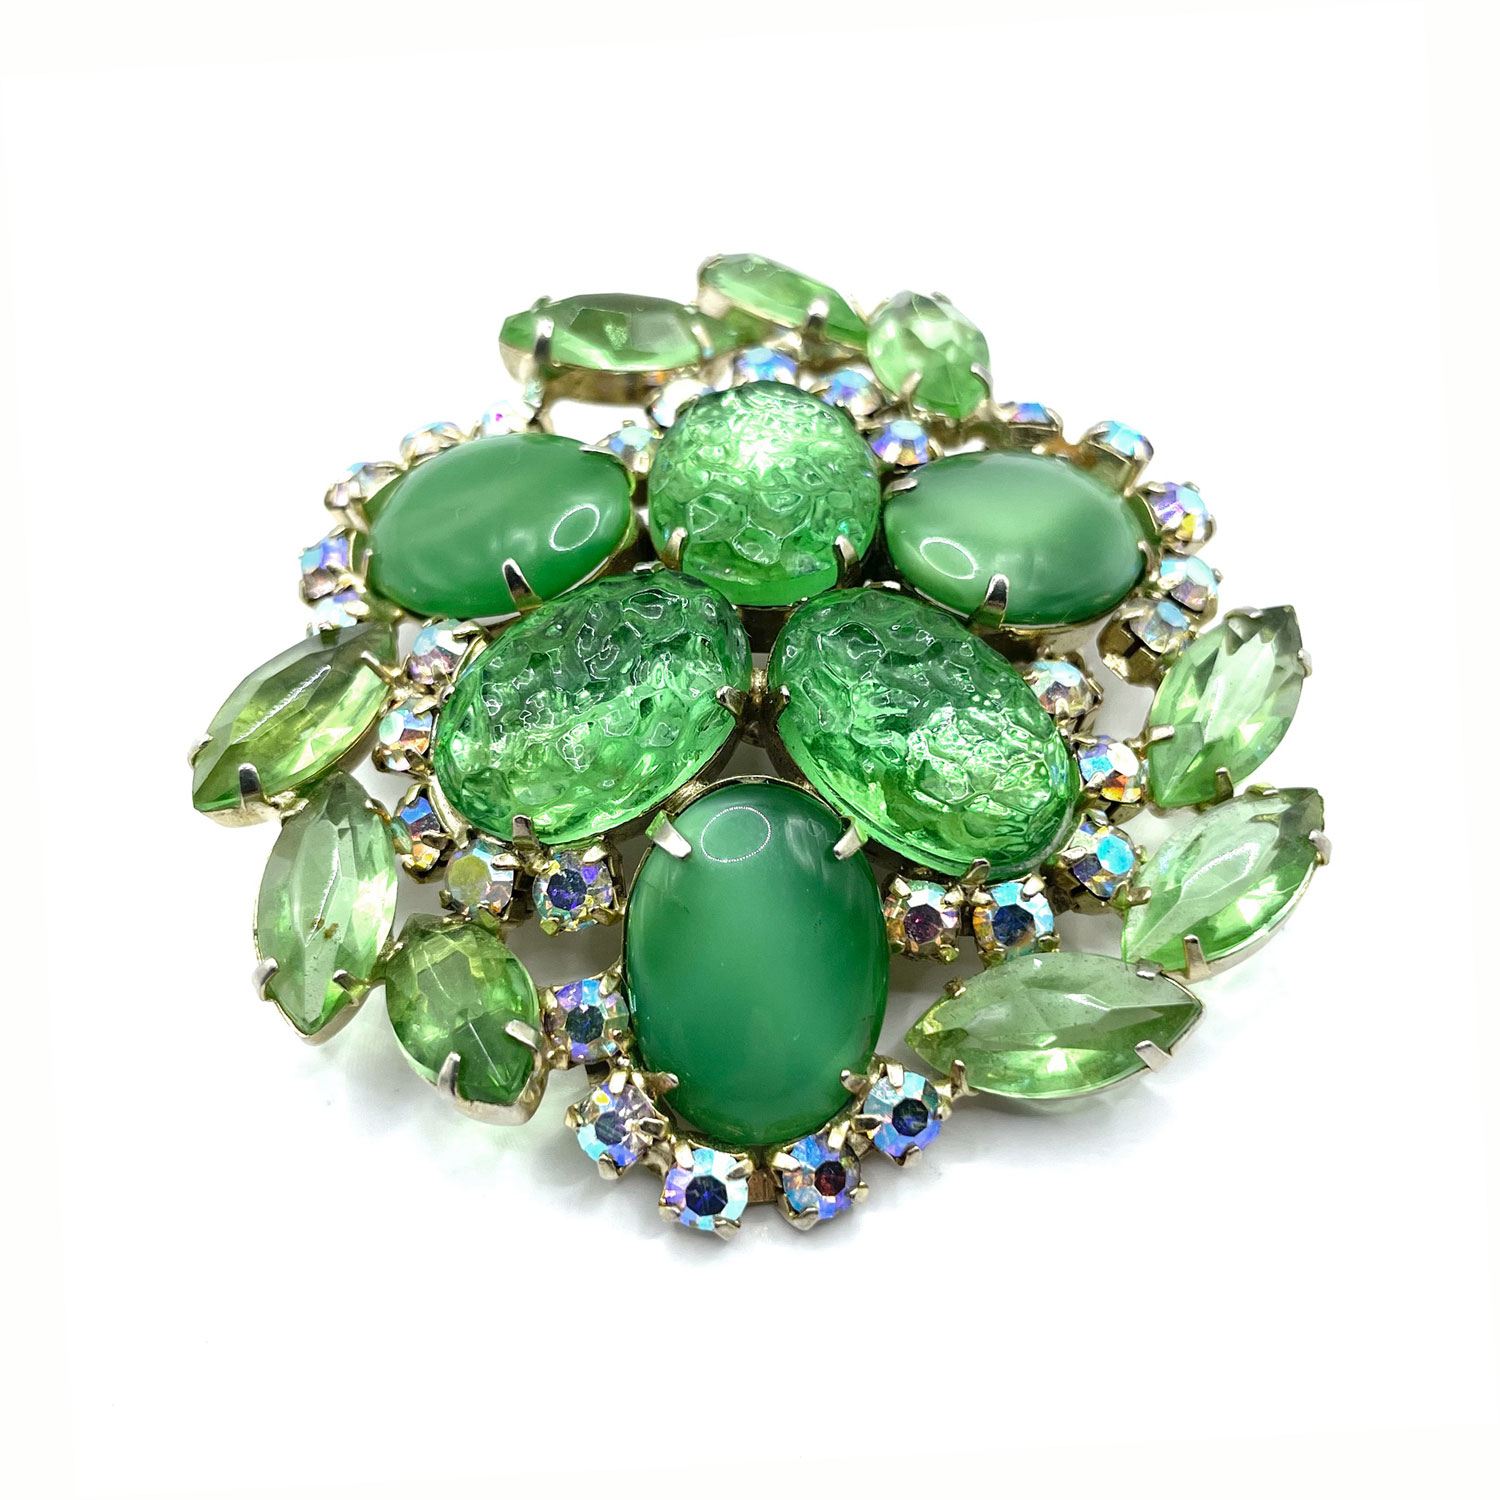 Delizza and Elster brooch